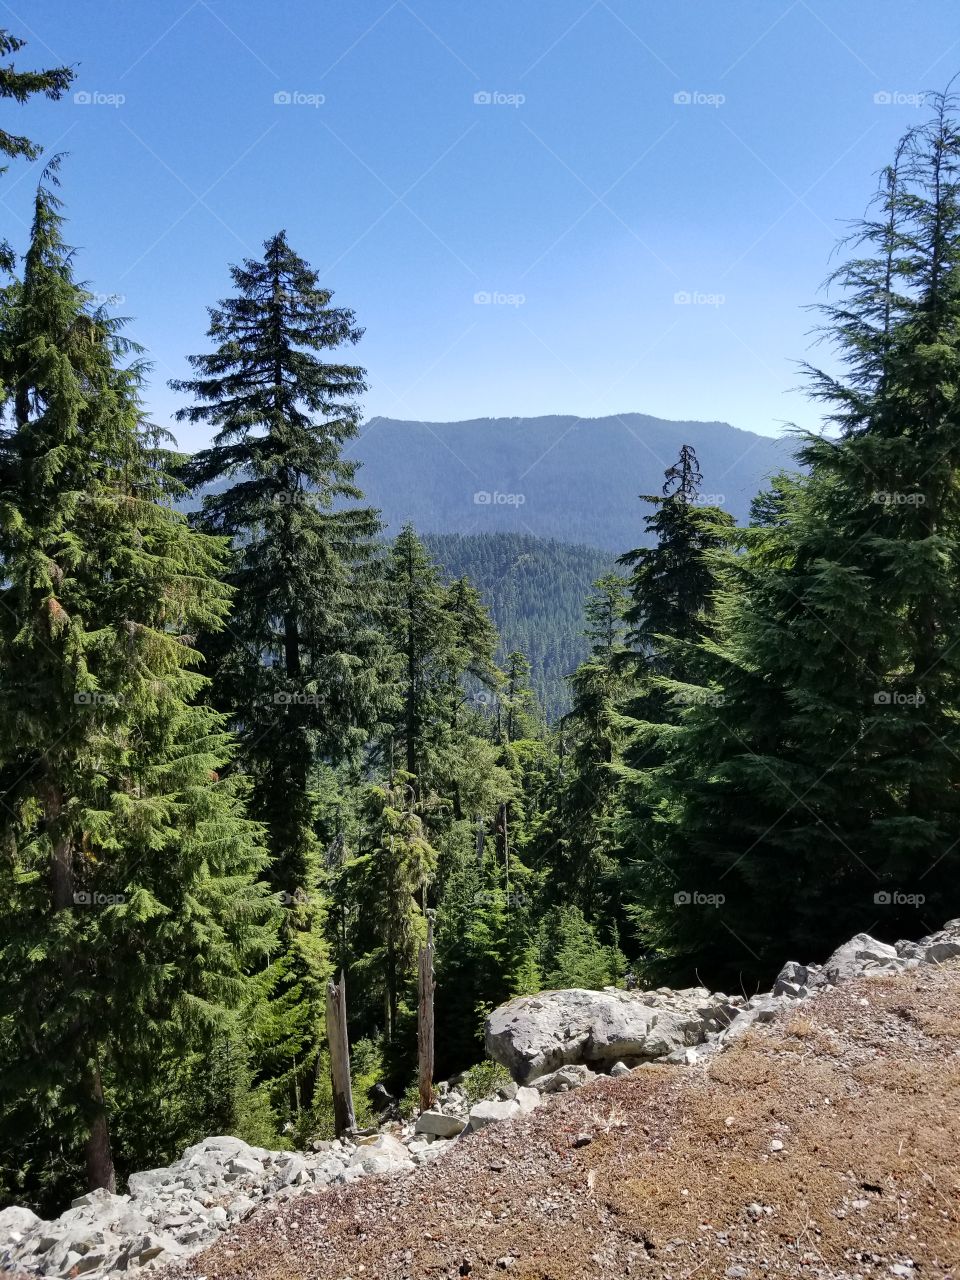 Willamette National Forest, OR